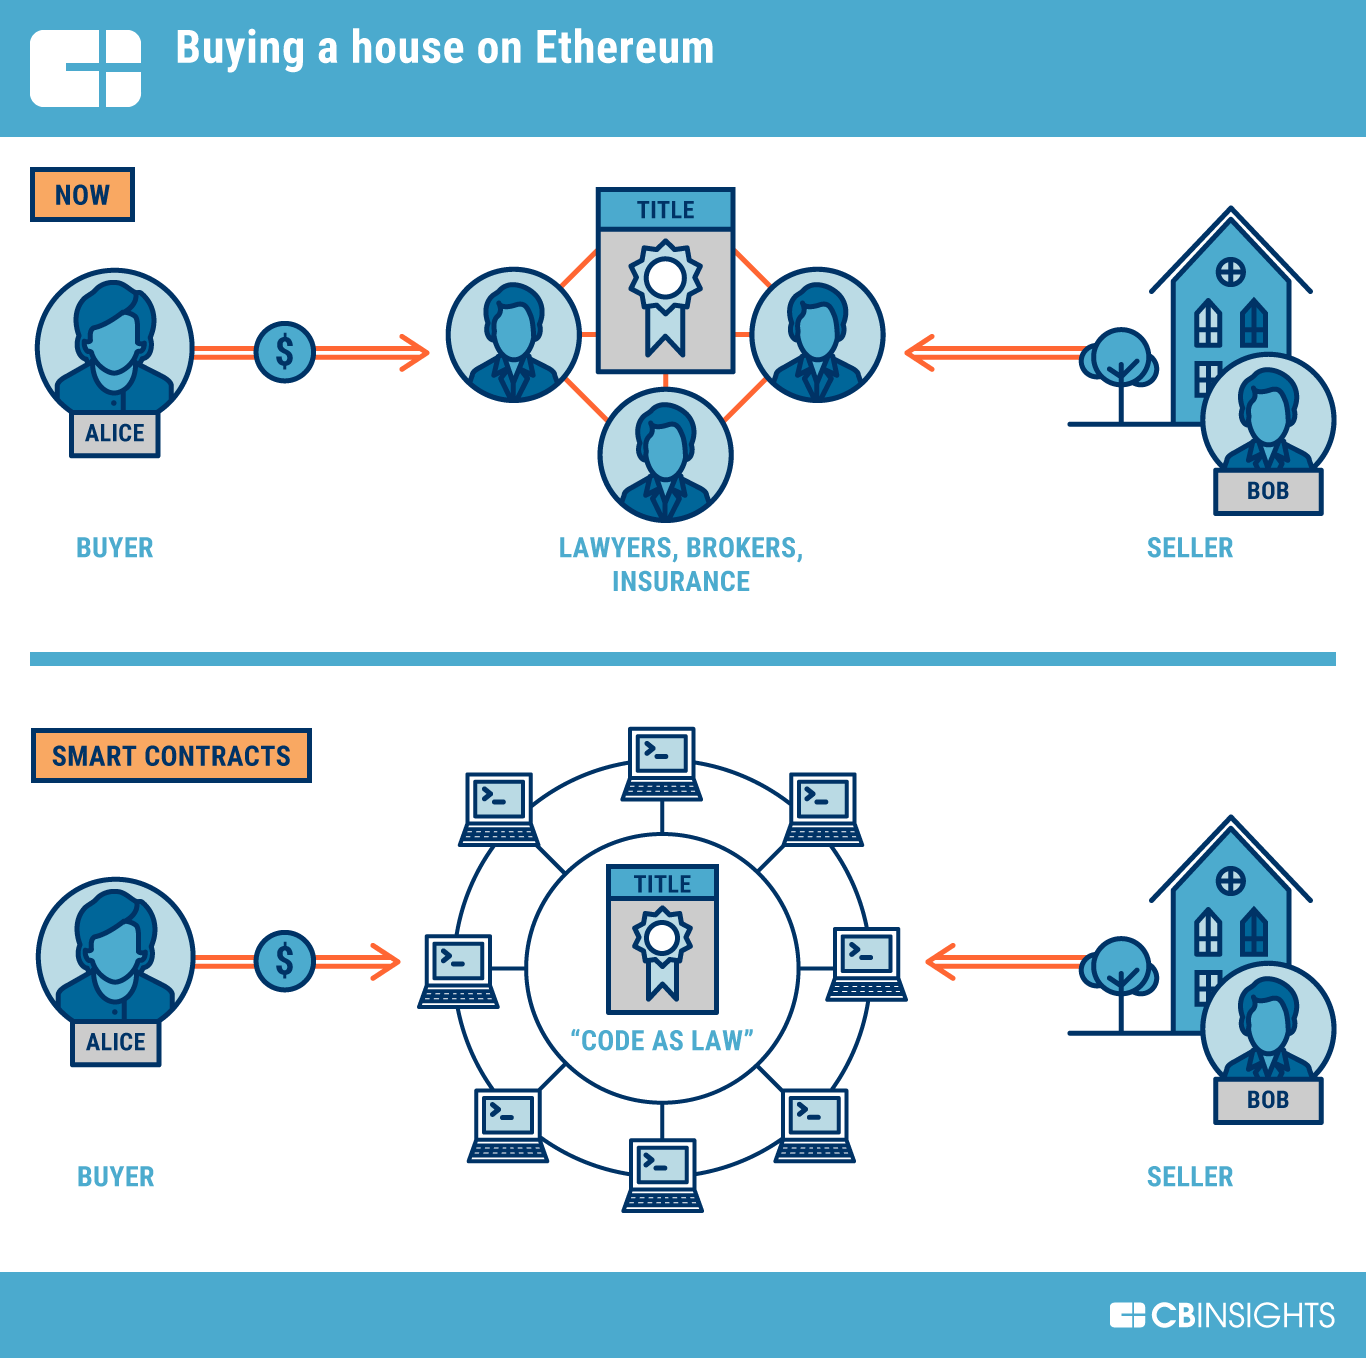 The traditional process of buying a house compared to the same process as mediated by smart contracts